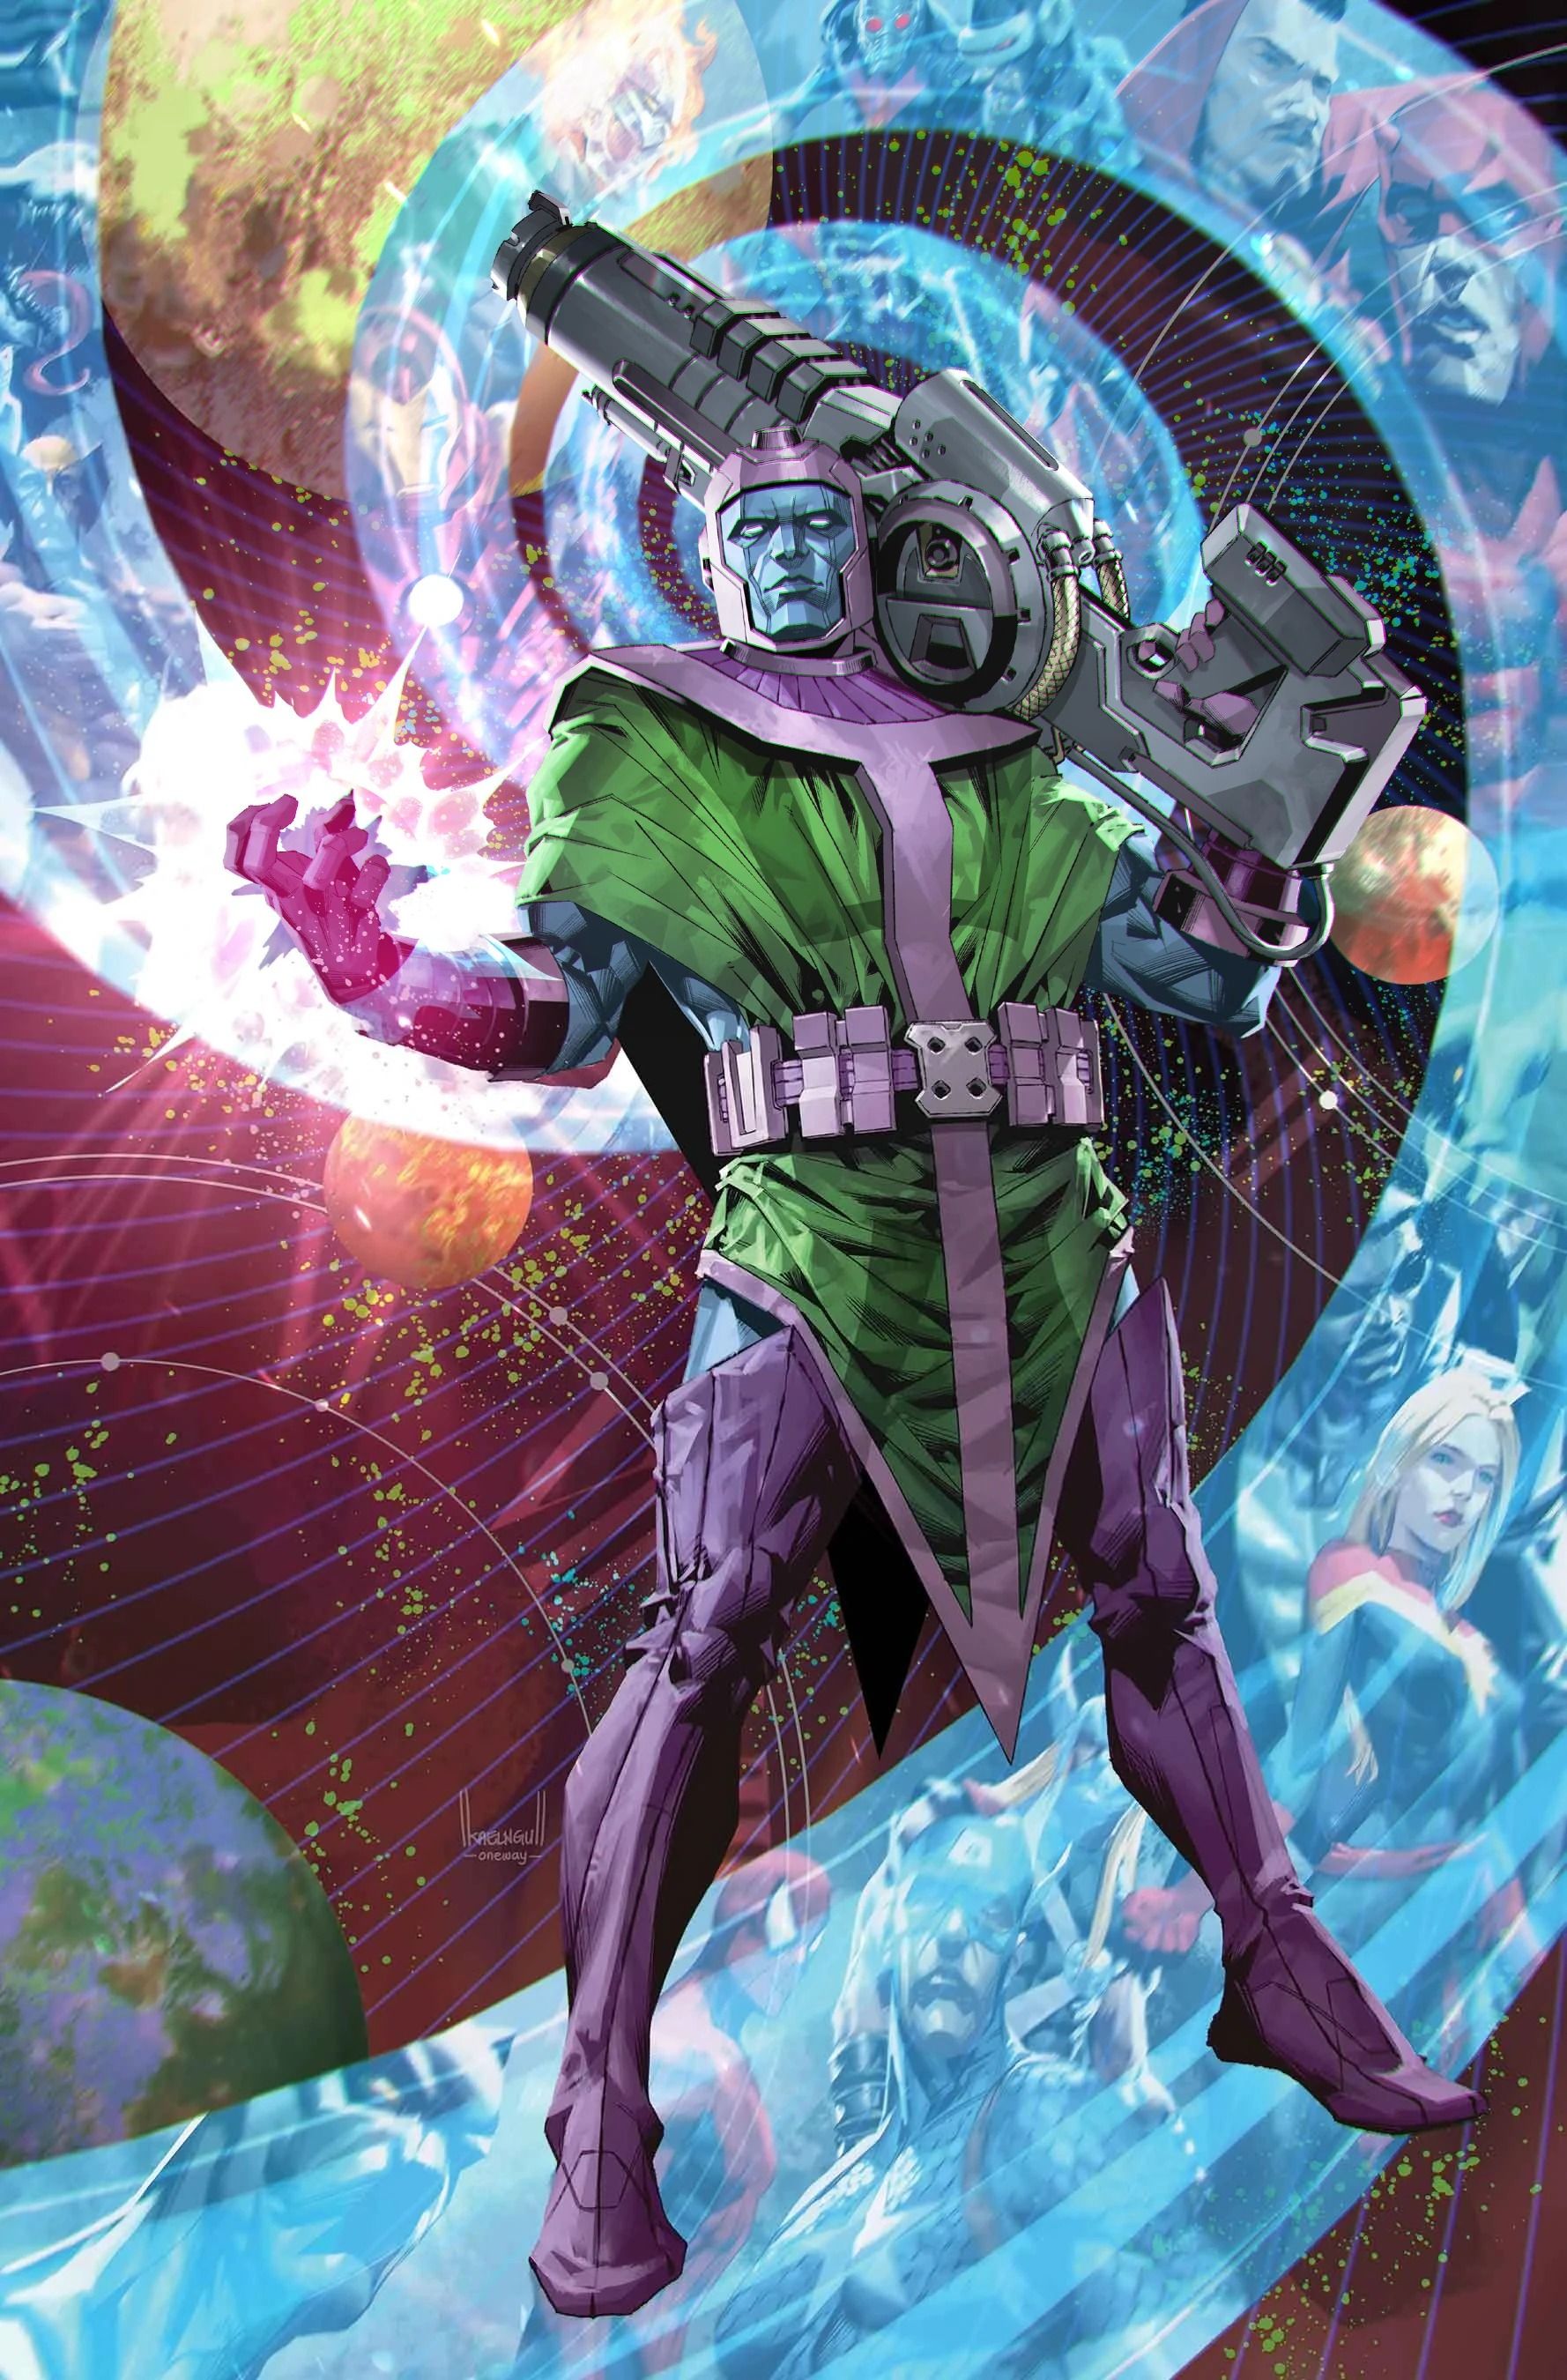 The 10 Best Kang the Conqueror Comics Ever